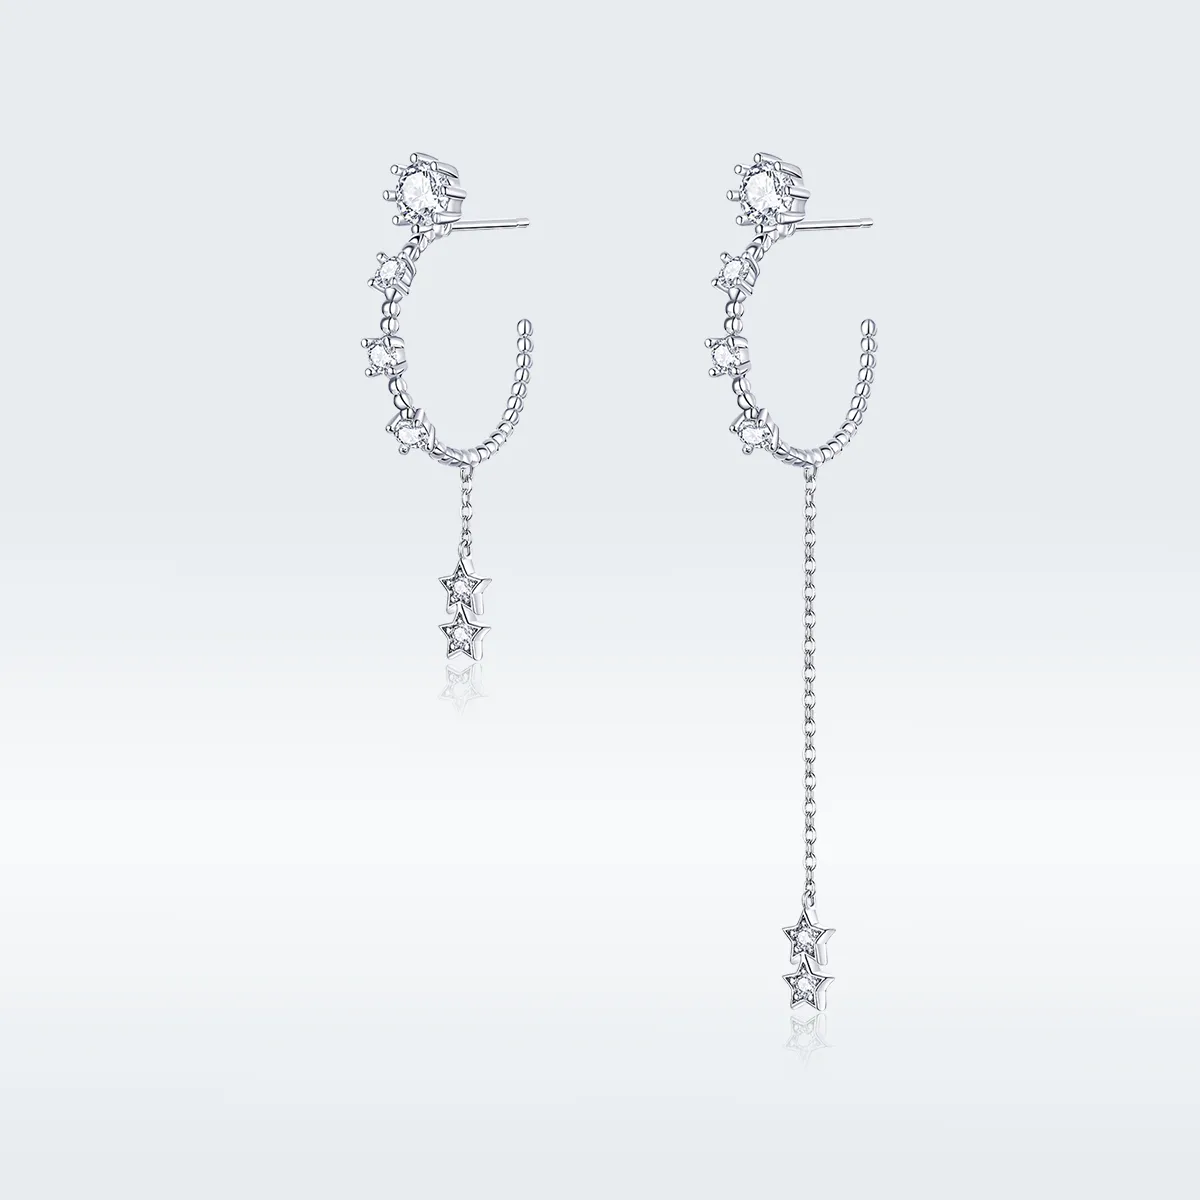 Pandora Style Bright Hanging Earrings - BSE310